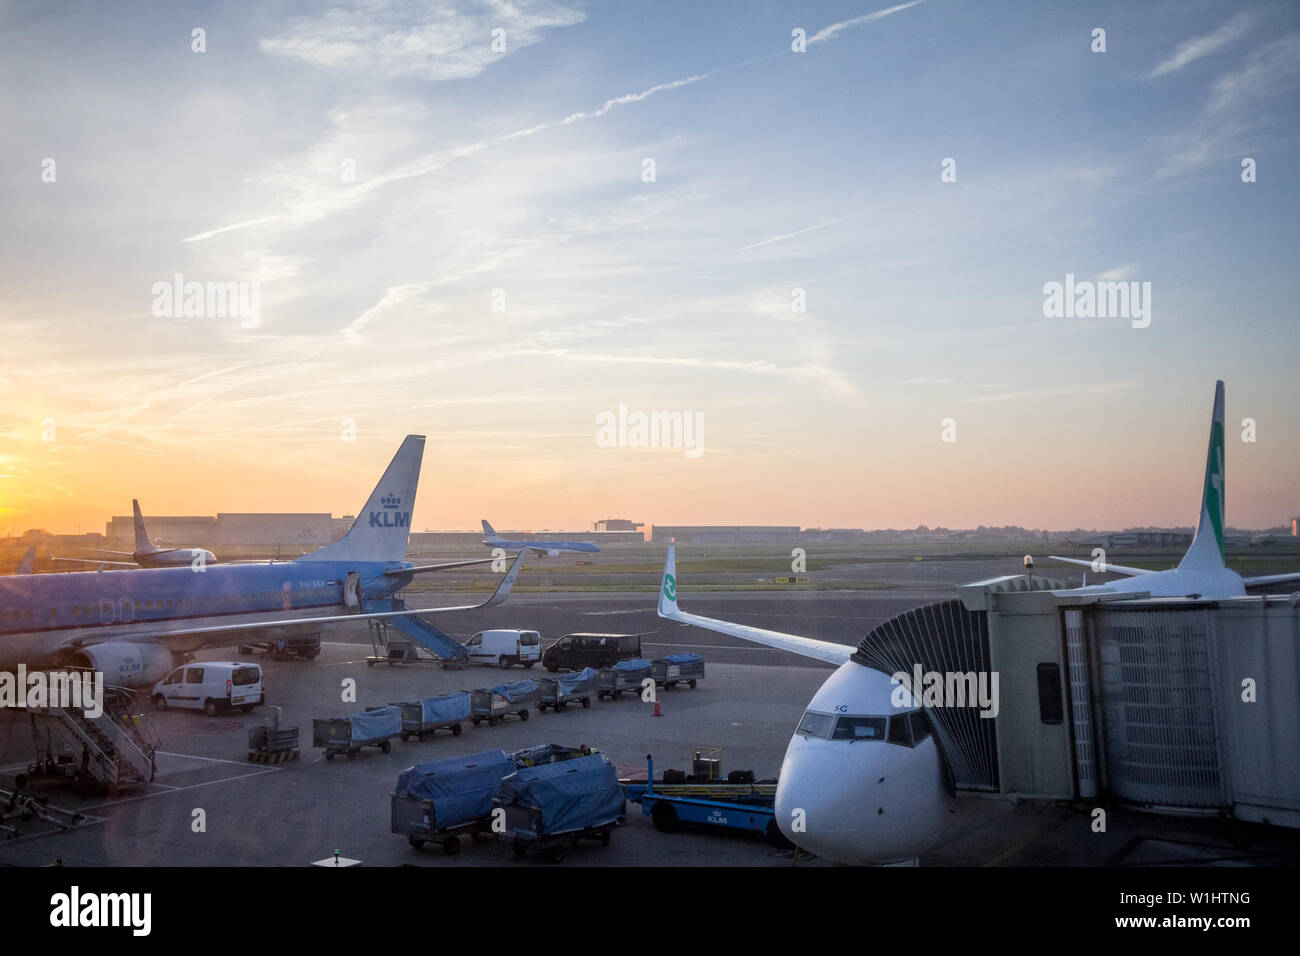 AMSTERDAM - NETHERLANDS, NOVEMBER 15, 2018: KLM Dutch airlines planes taxxing while a Transavia plane is bording in Amsterdam Schiphol Airport, the hu Stock Photo